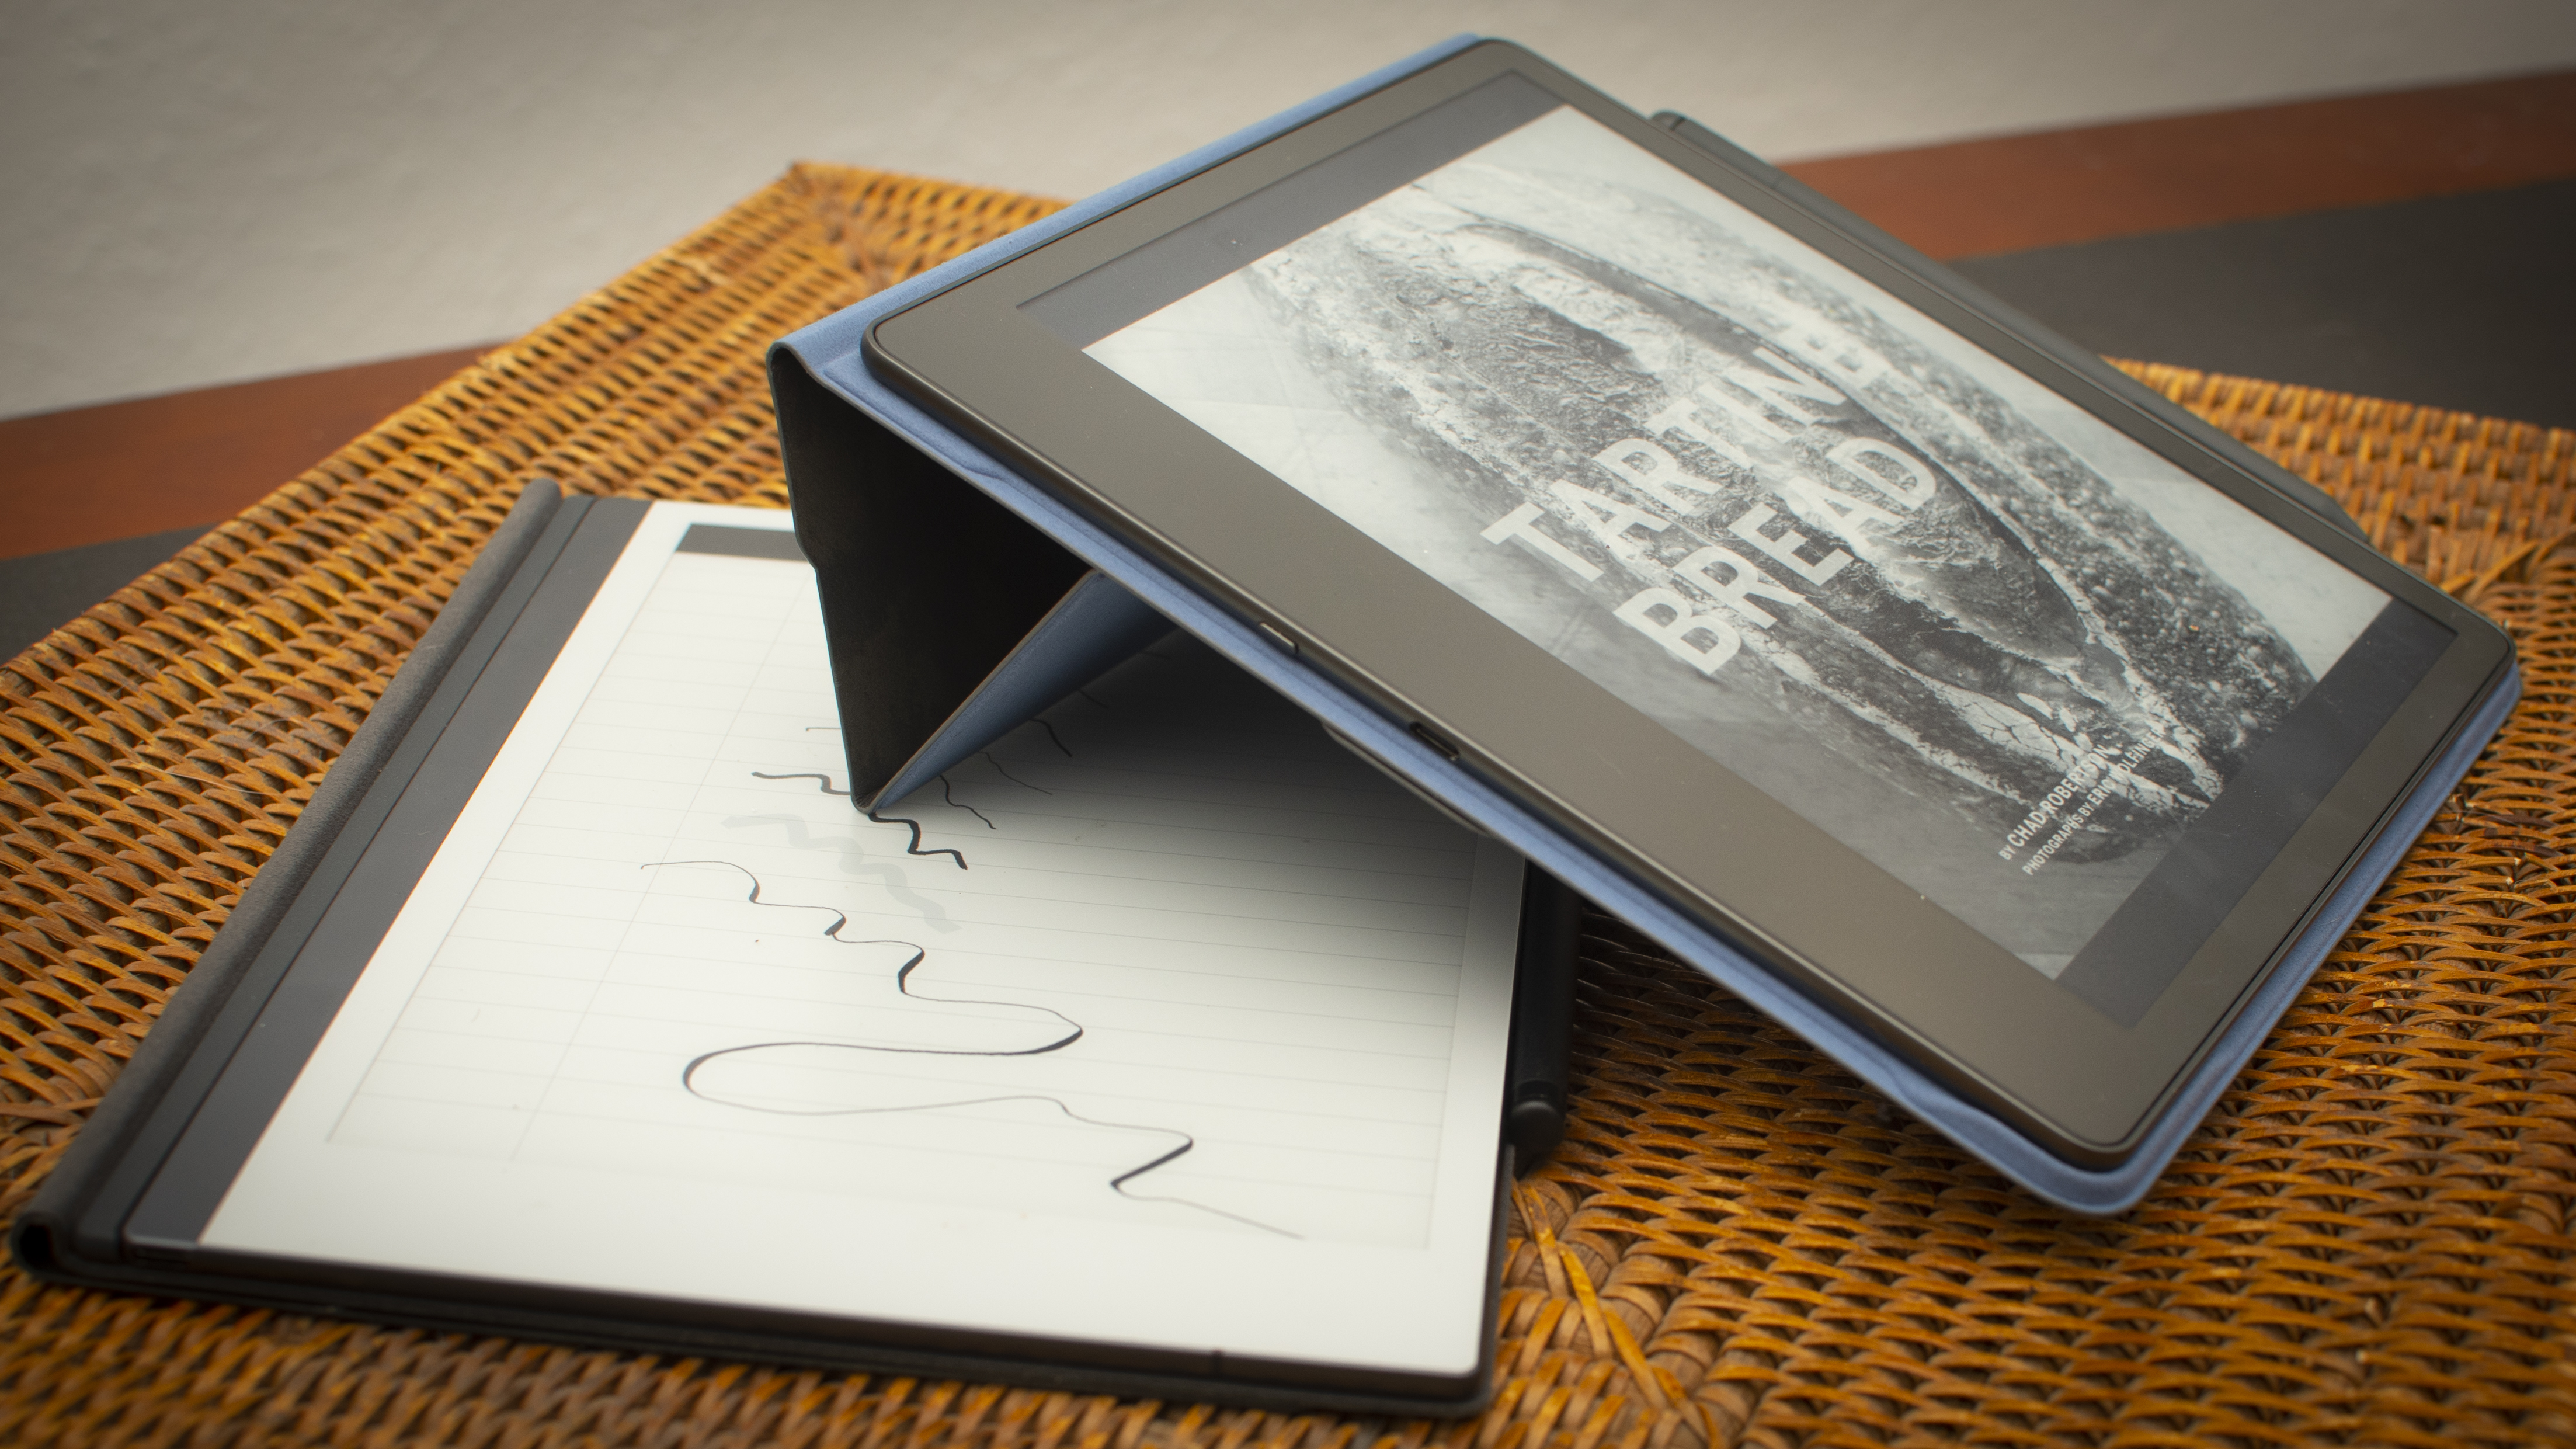 ReMarkable's redesigned e-paper tablet is more powerful and more